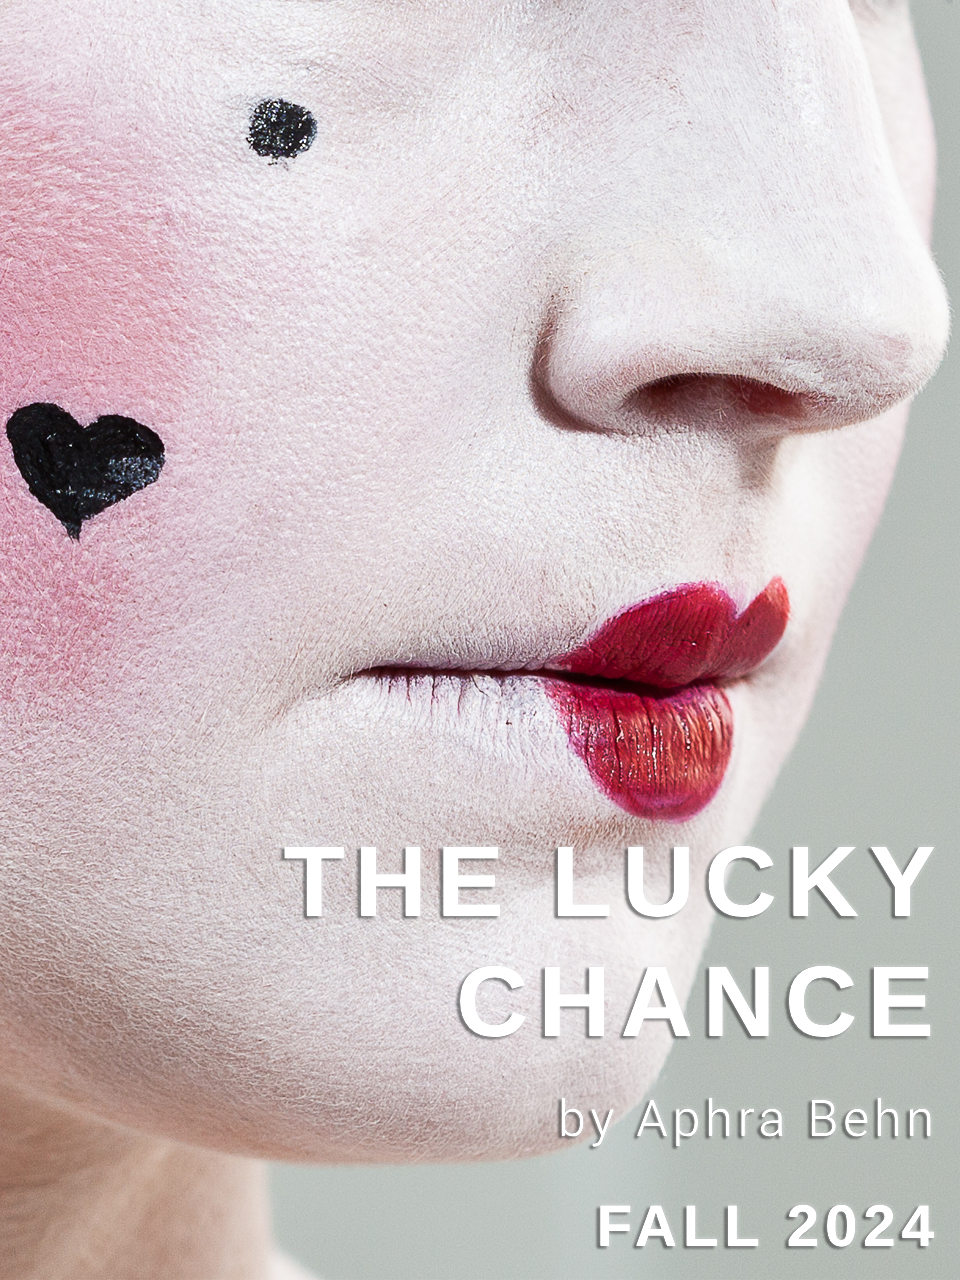 The Lucky Chance Aphra Behn teaser poster depicting face in 17th century makeup with heart beauty mark